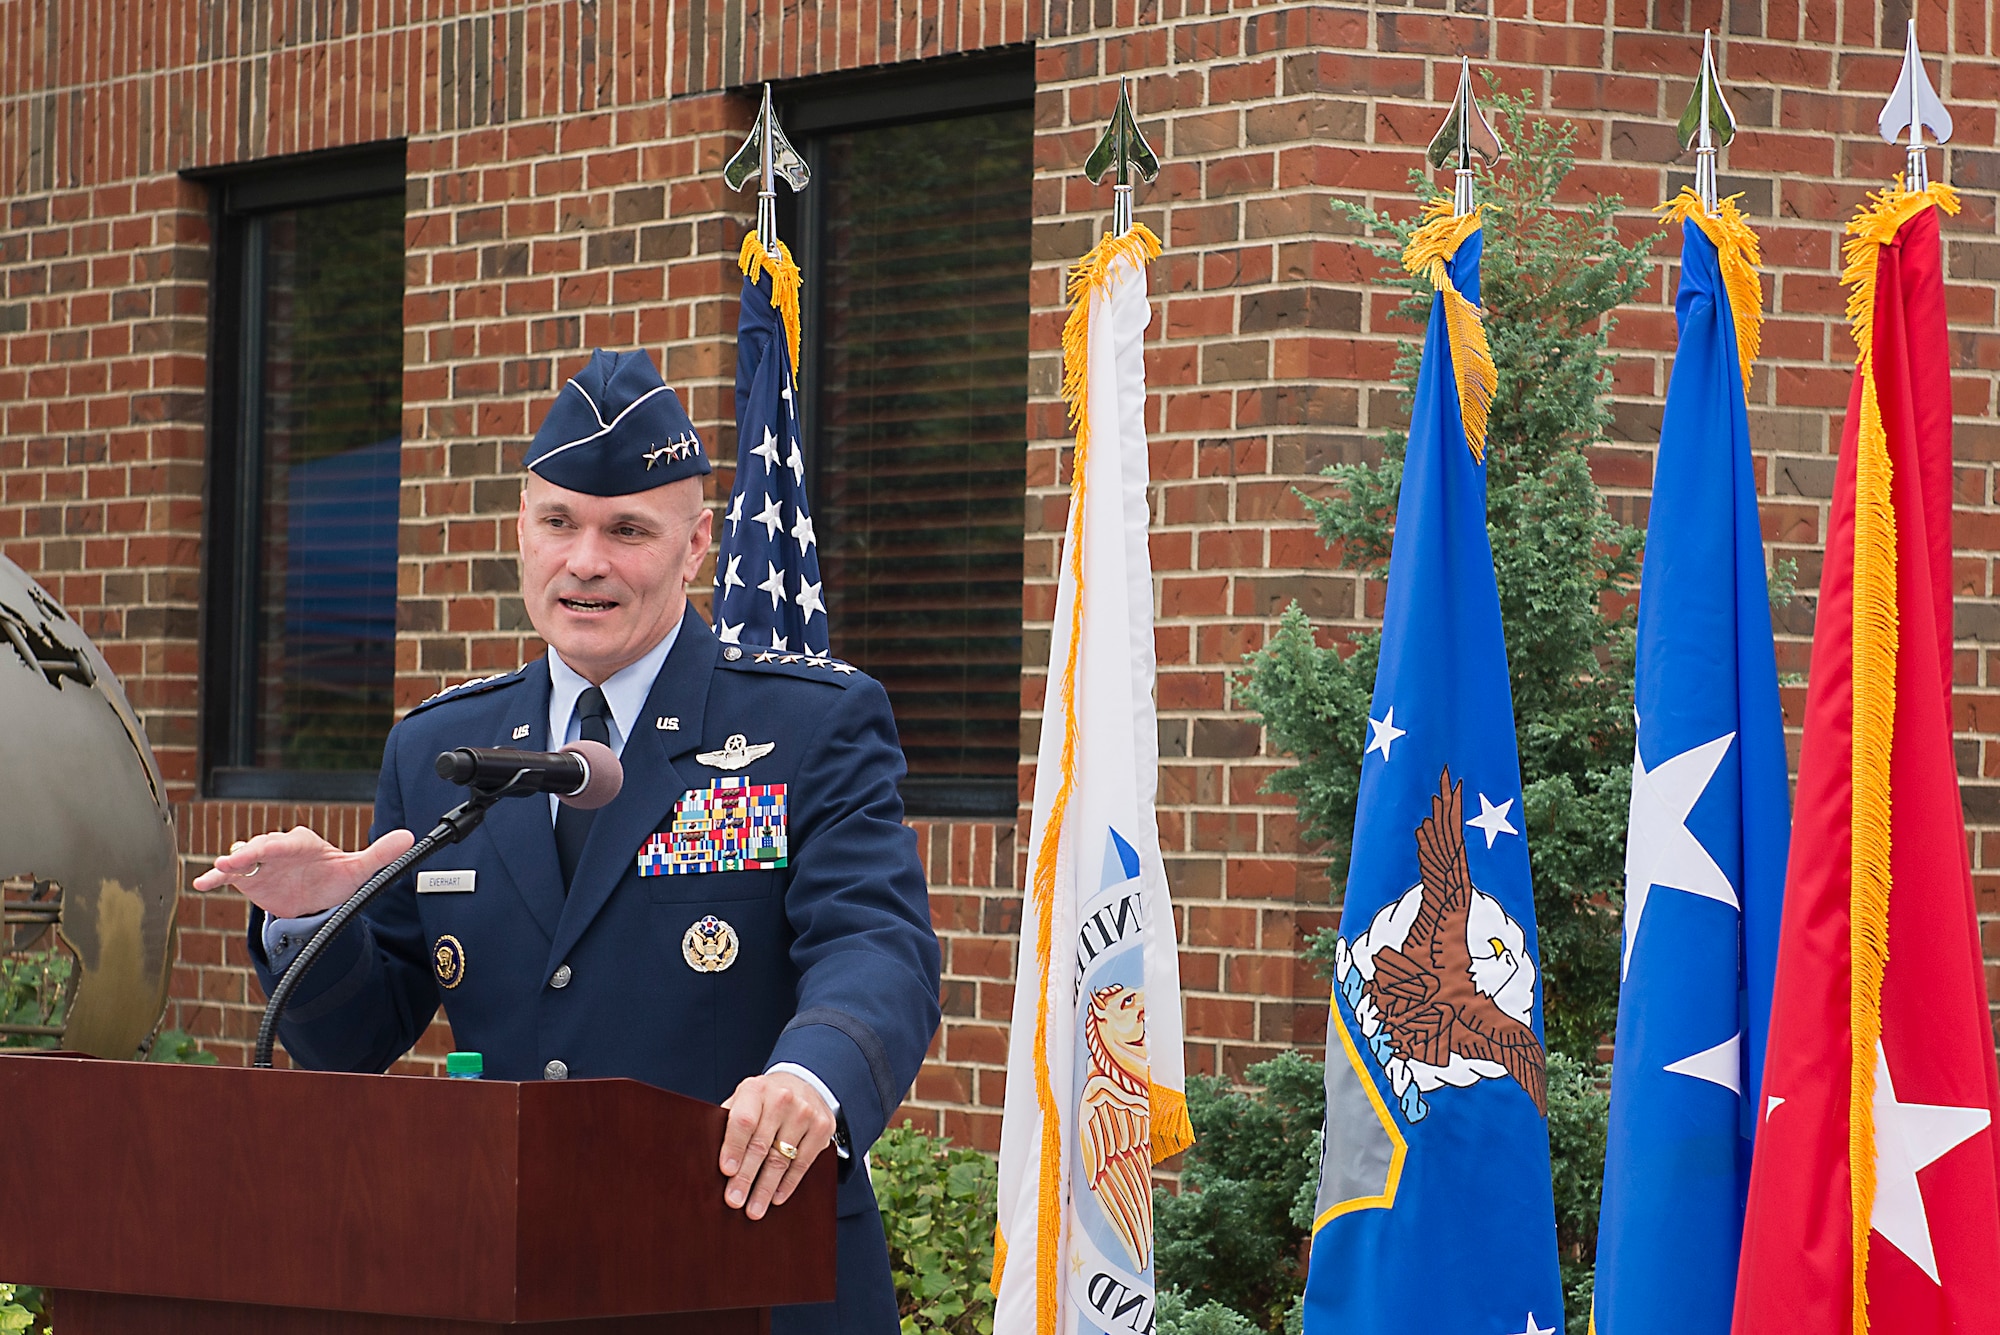 Gen. Carlton D. Everhart II, Air Mobility Command commander, describes Gen. Duane H. Cassidy’s legacy during a dedication ceremony renaming the Global Reach and Planning Center to the Gen. Duane H. Cassidy Conference Center, at Scott Air Force Base, Ill.